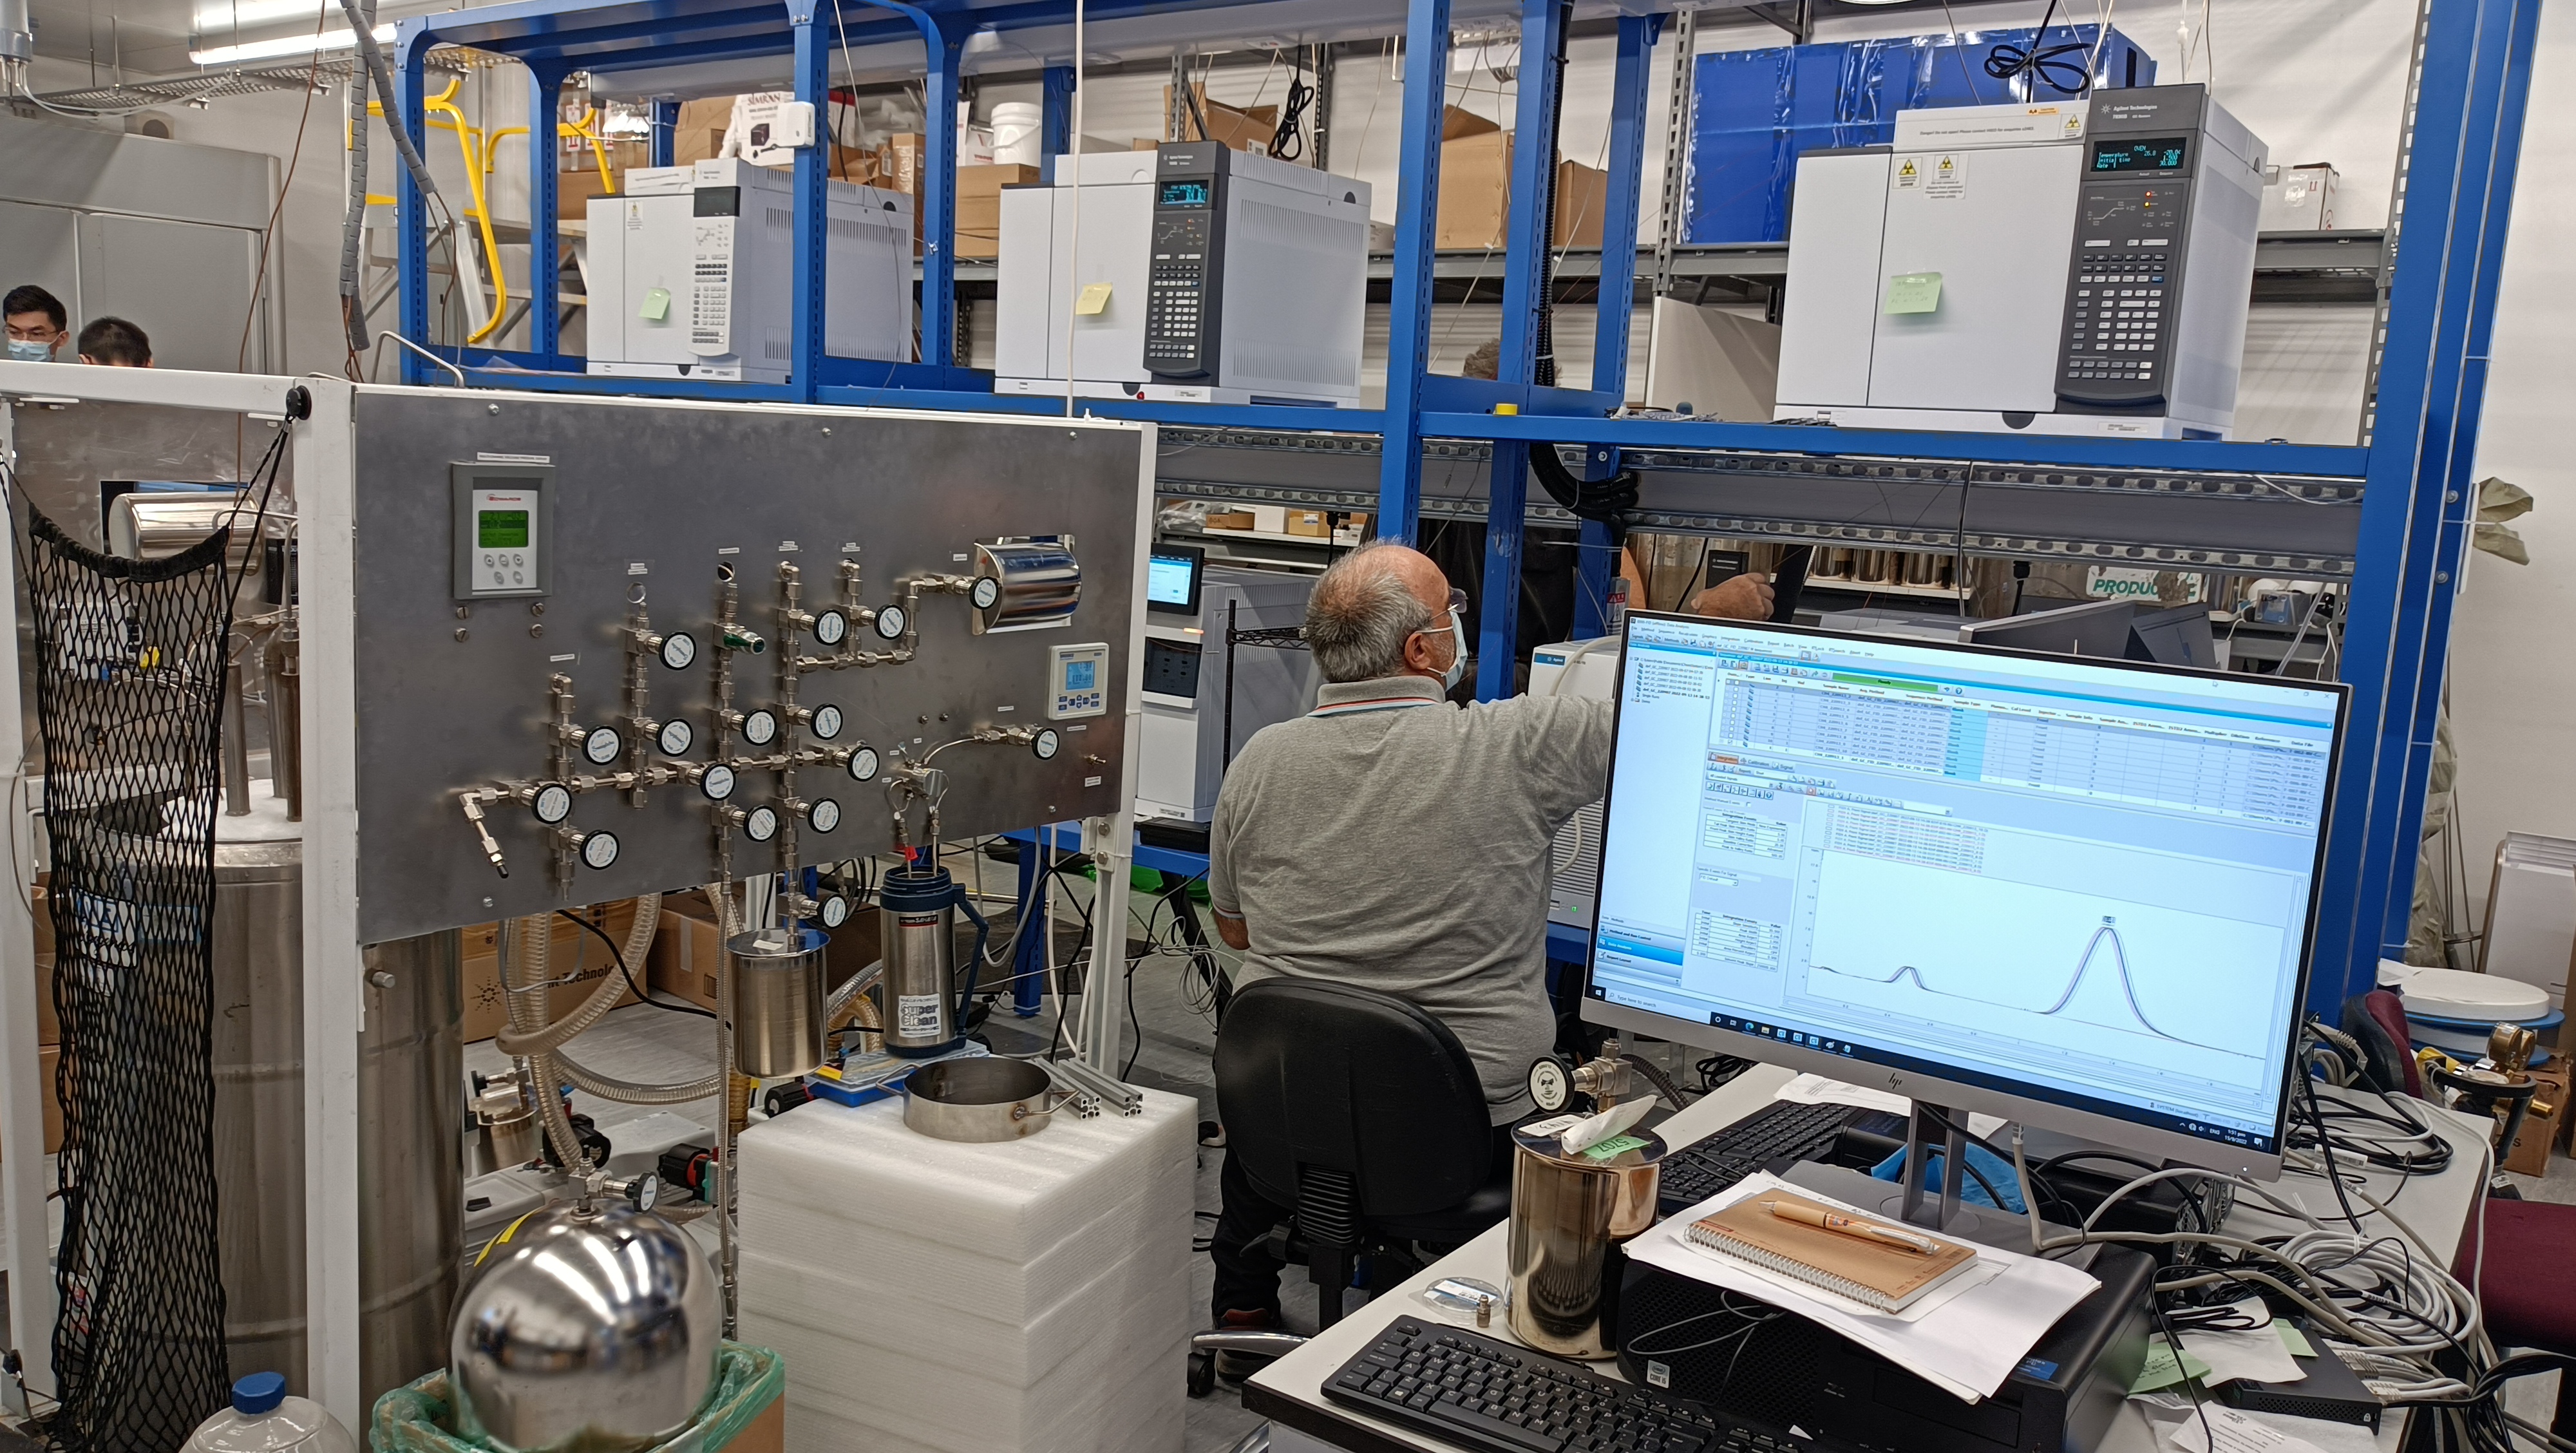 World-class Volatile Organic Compounds (VOC) Laboratory equipped with cutting-edge instruments for ambient and source characterization of VOCs and to serve as a benchmarking laboratory to support the air quality monitoring network in Hong Kong and the Greater Bay Area.